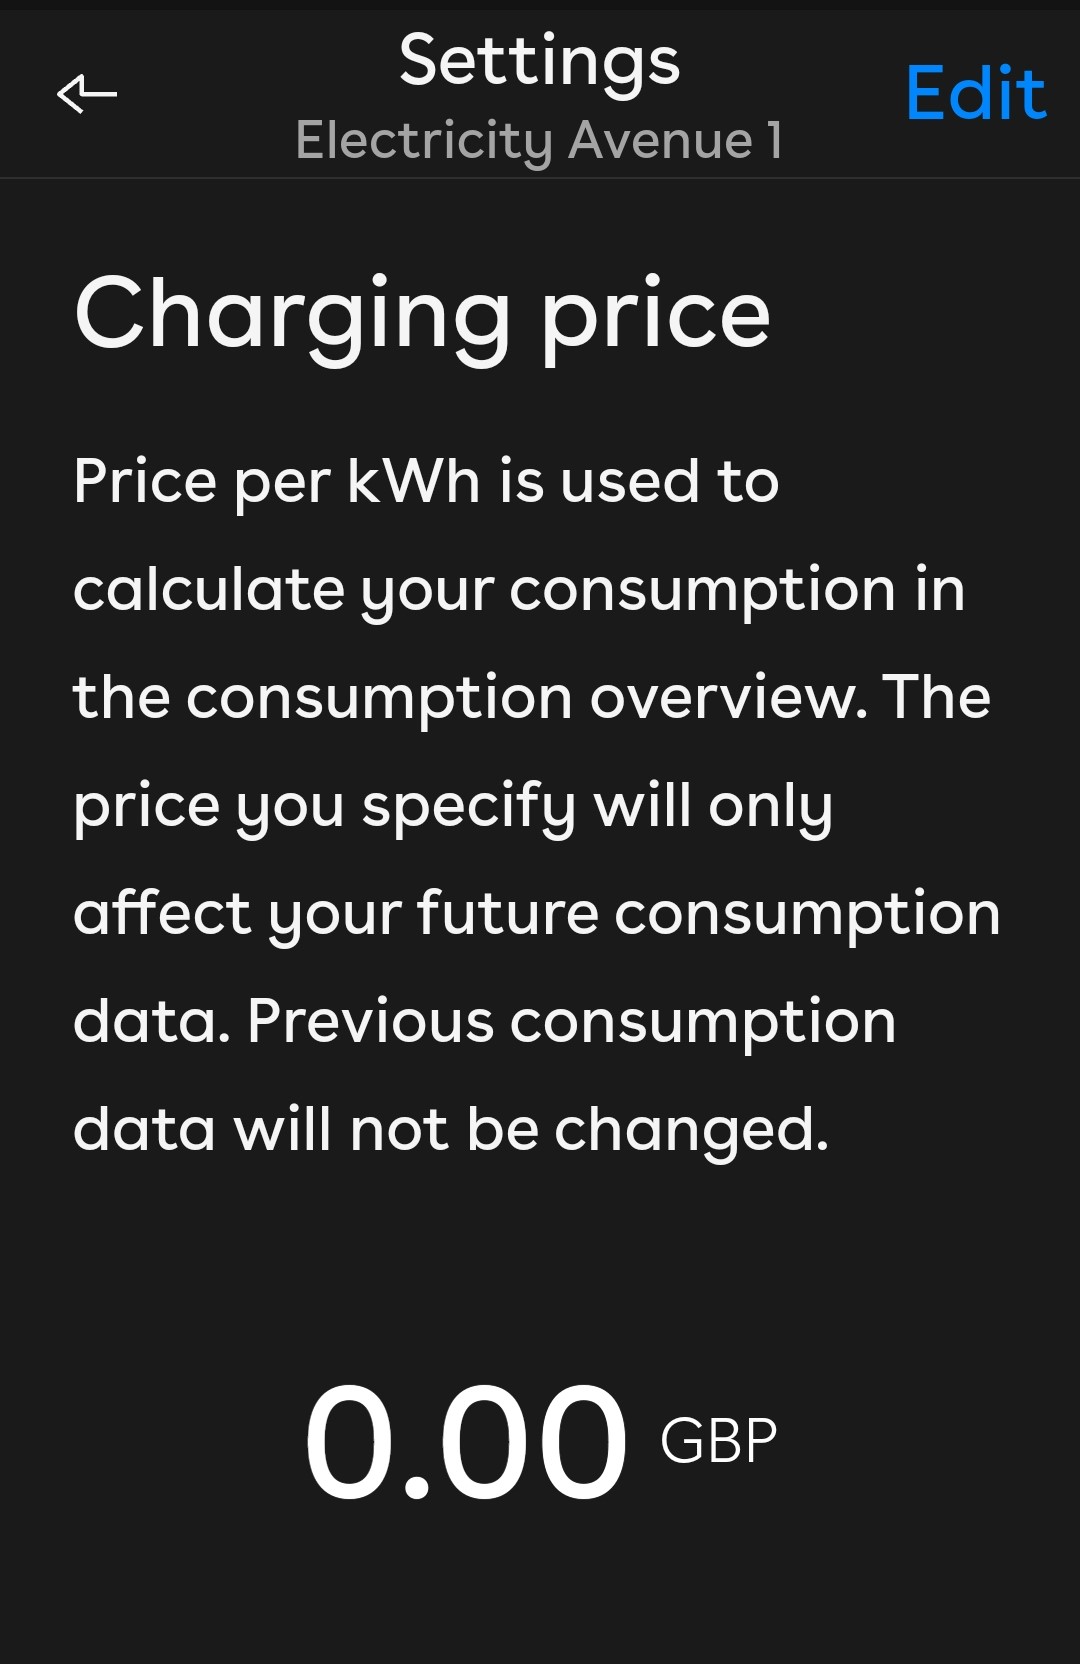 A screenshot of the Charging price screen in the Easee app.